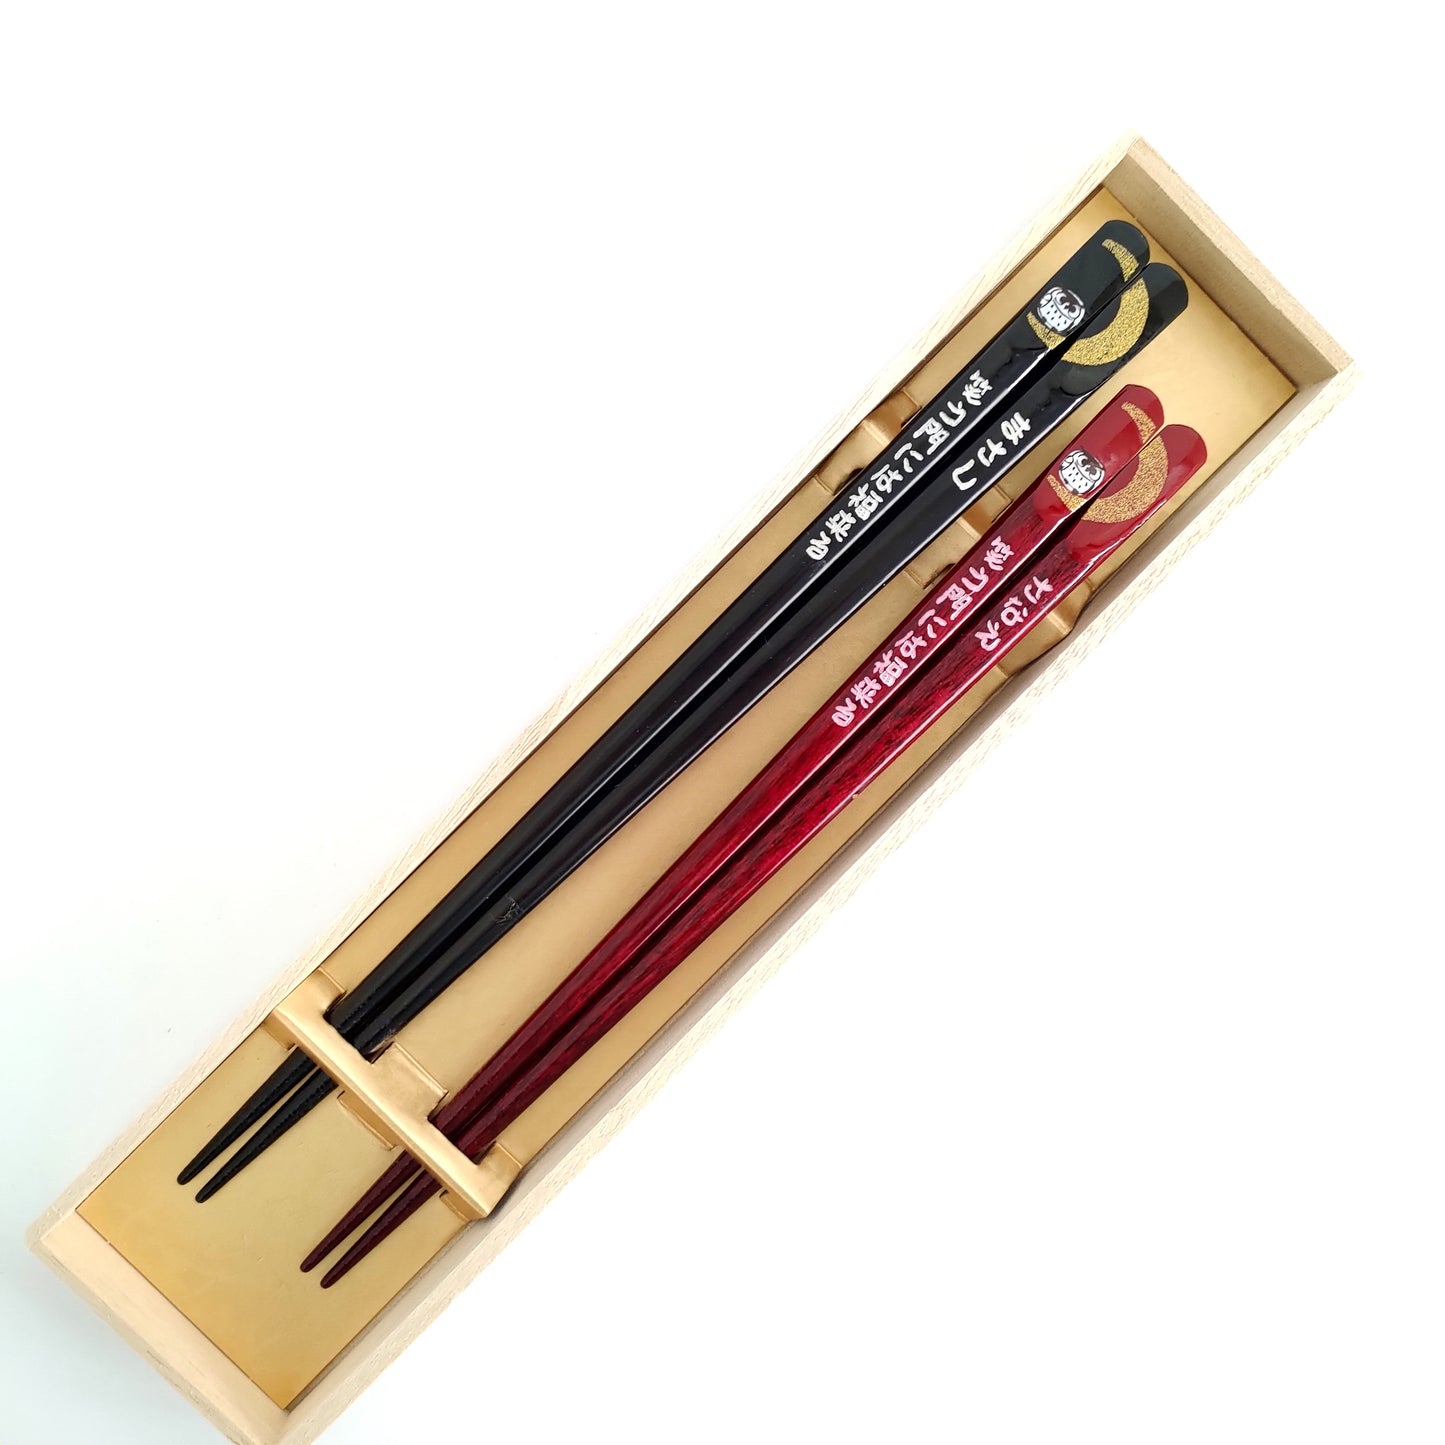 Awesome moon and owl design Japanese chopstics black red - DOUBLE PAIR WITH ENGRAVED WOODEN BOX SET